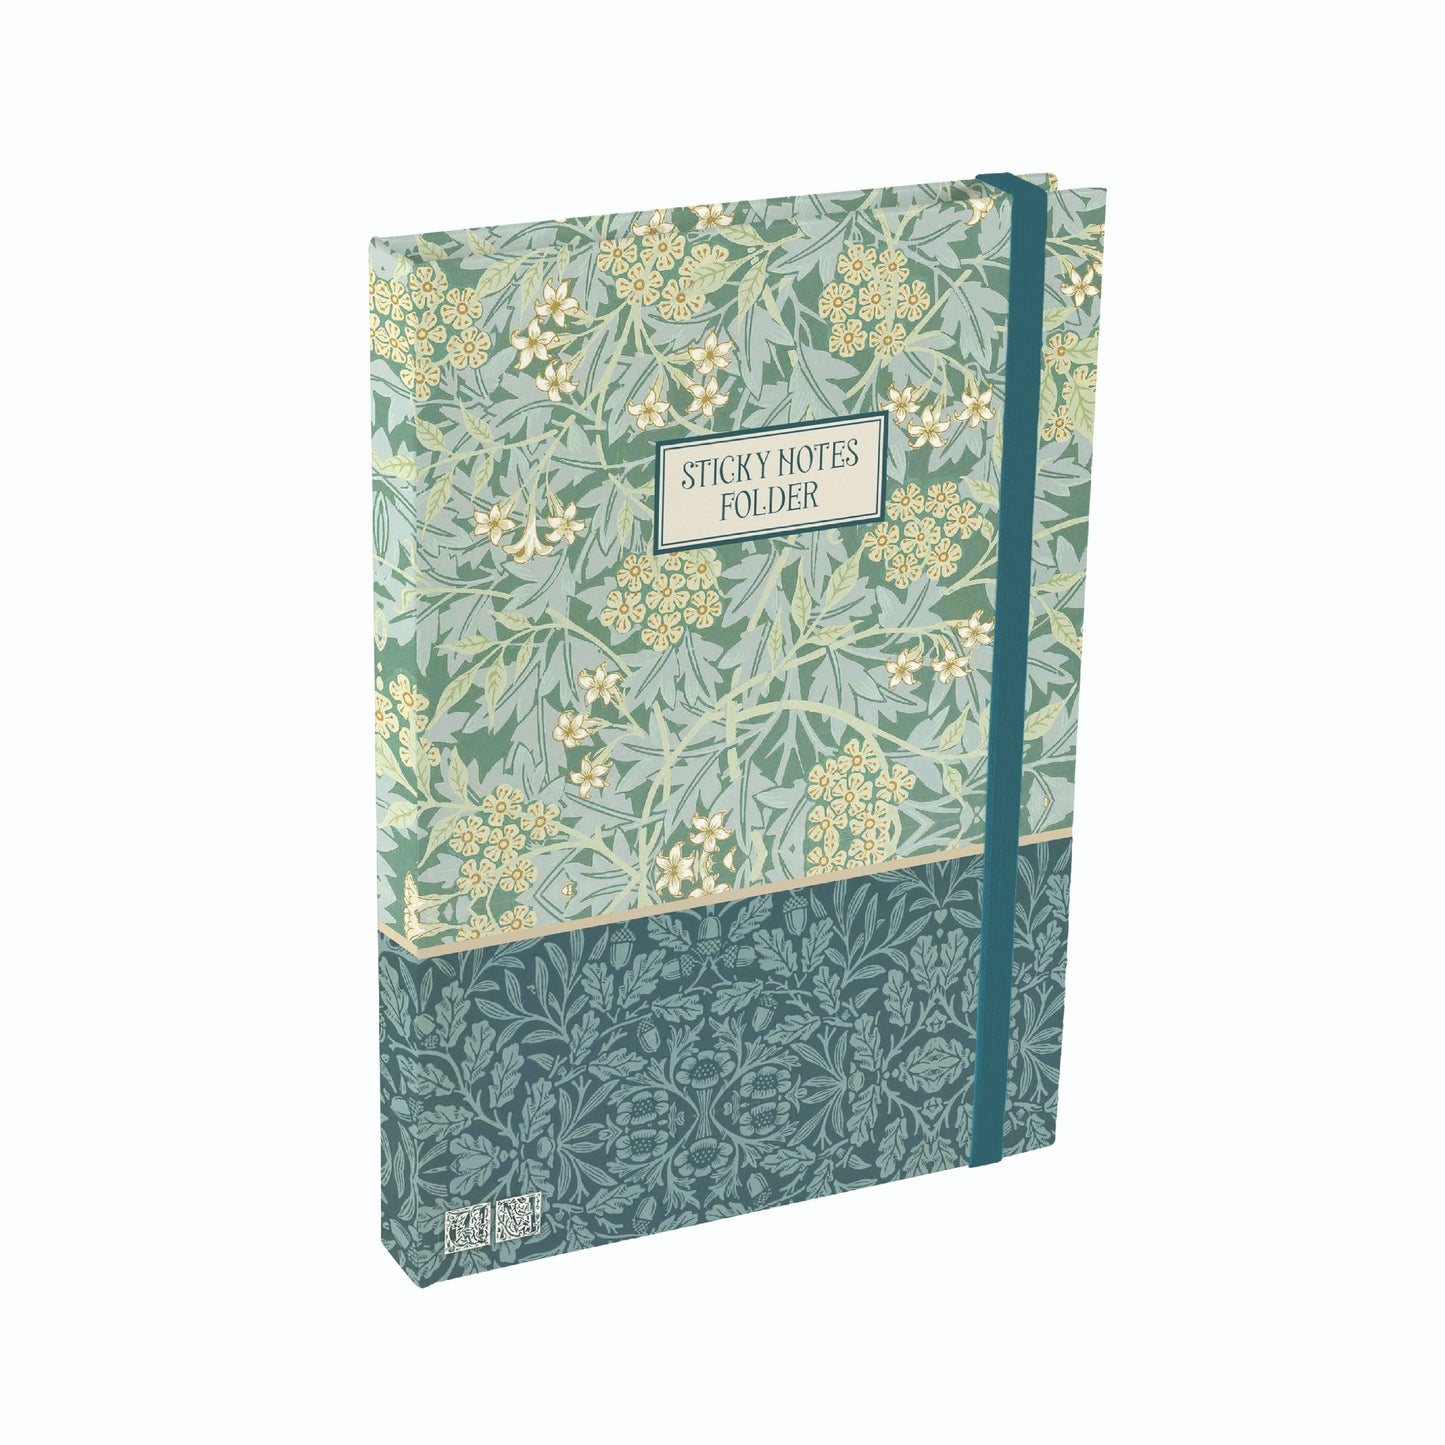 Gifted Stationery William Morris Sticky Notes Folder